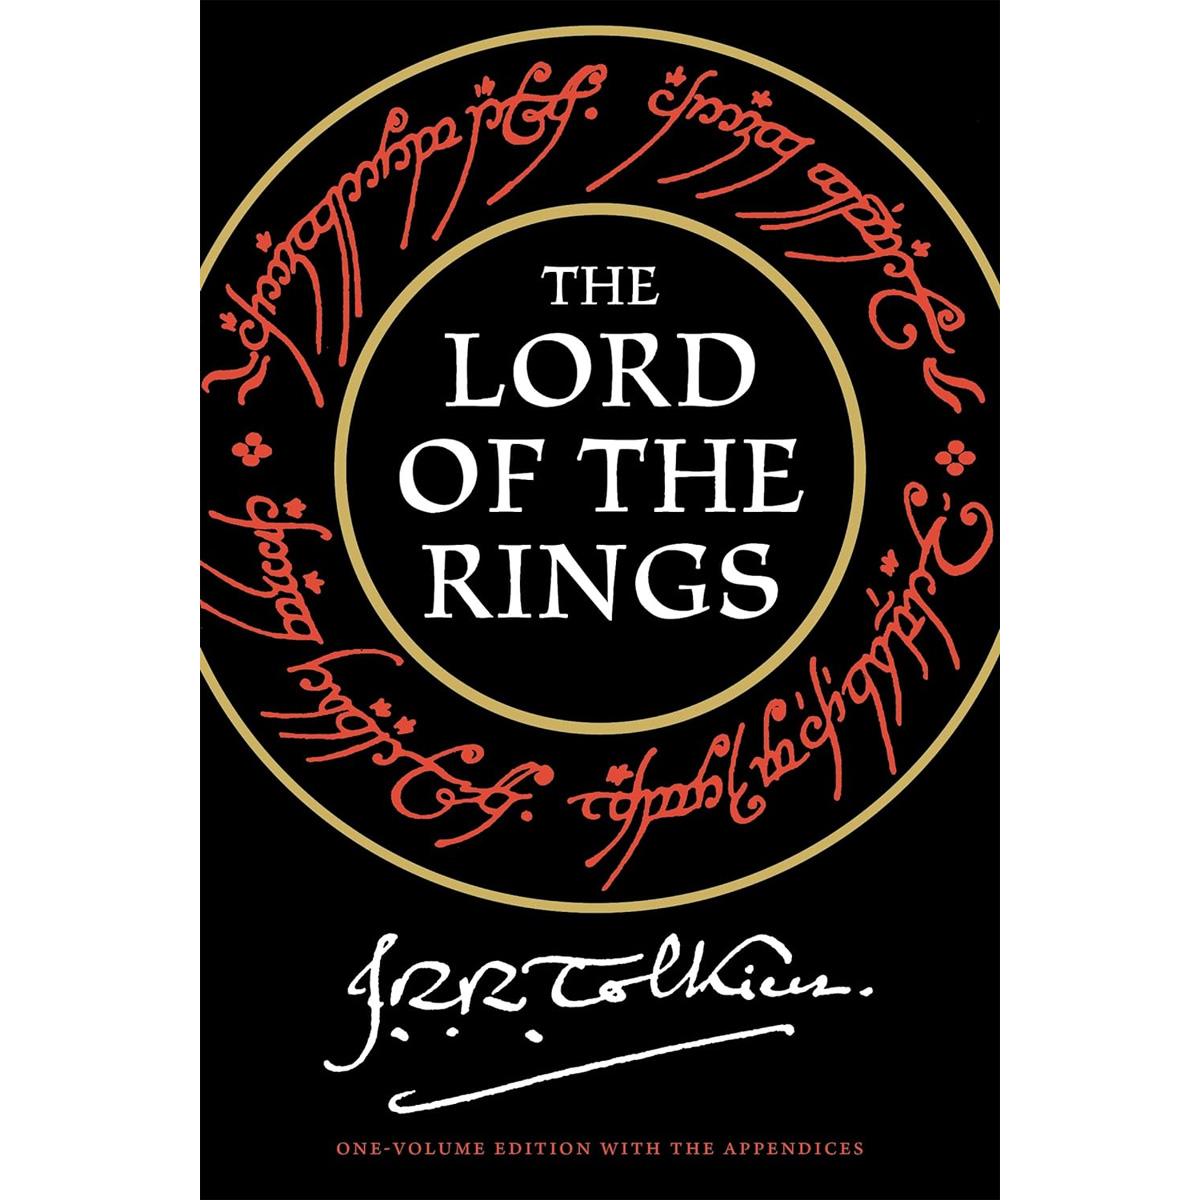 The Lord of the Rings One Volume eBook for $1.99